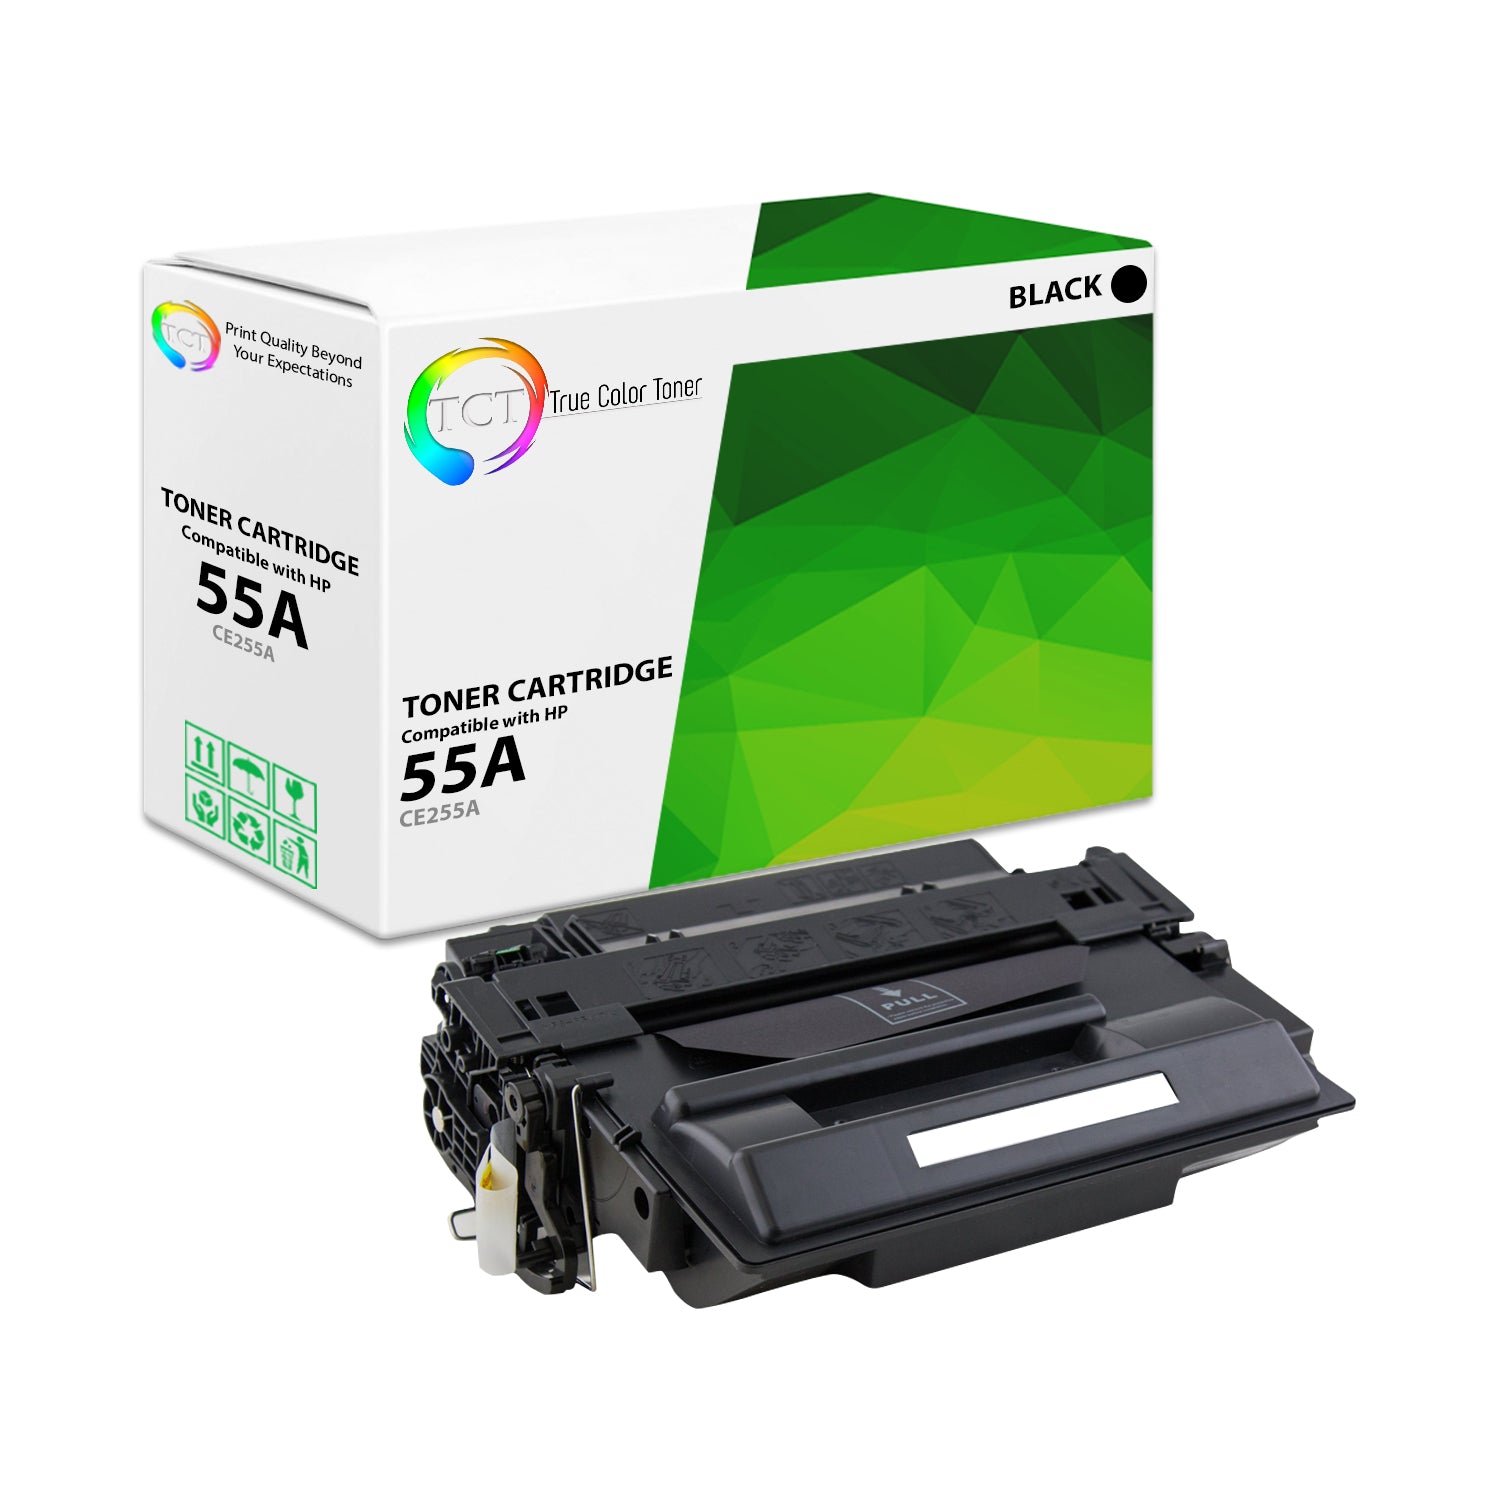 TCT Compatible Toner Cartridge Replacement for the HP 55A Series - 1 Pack Black